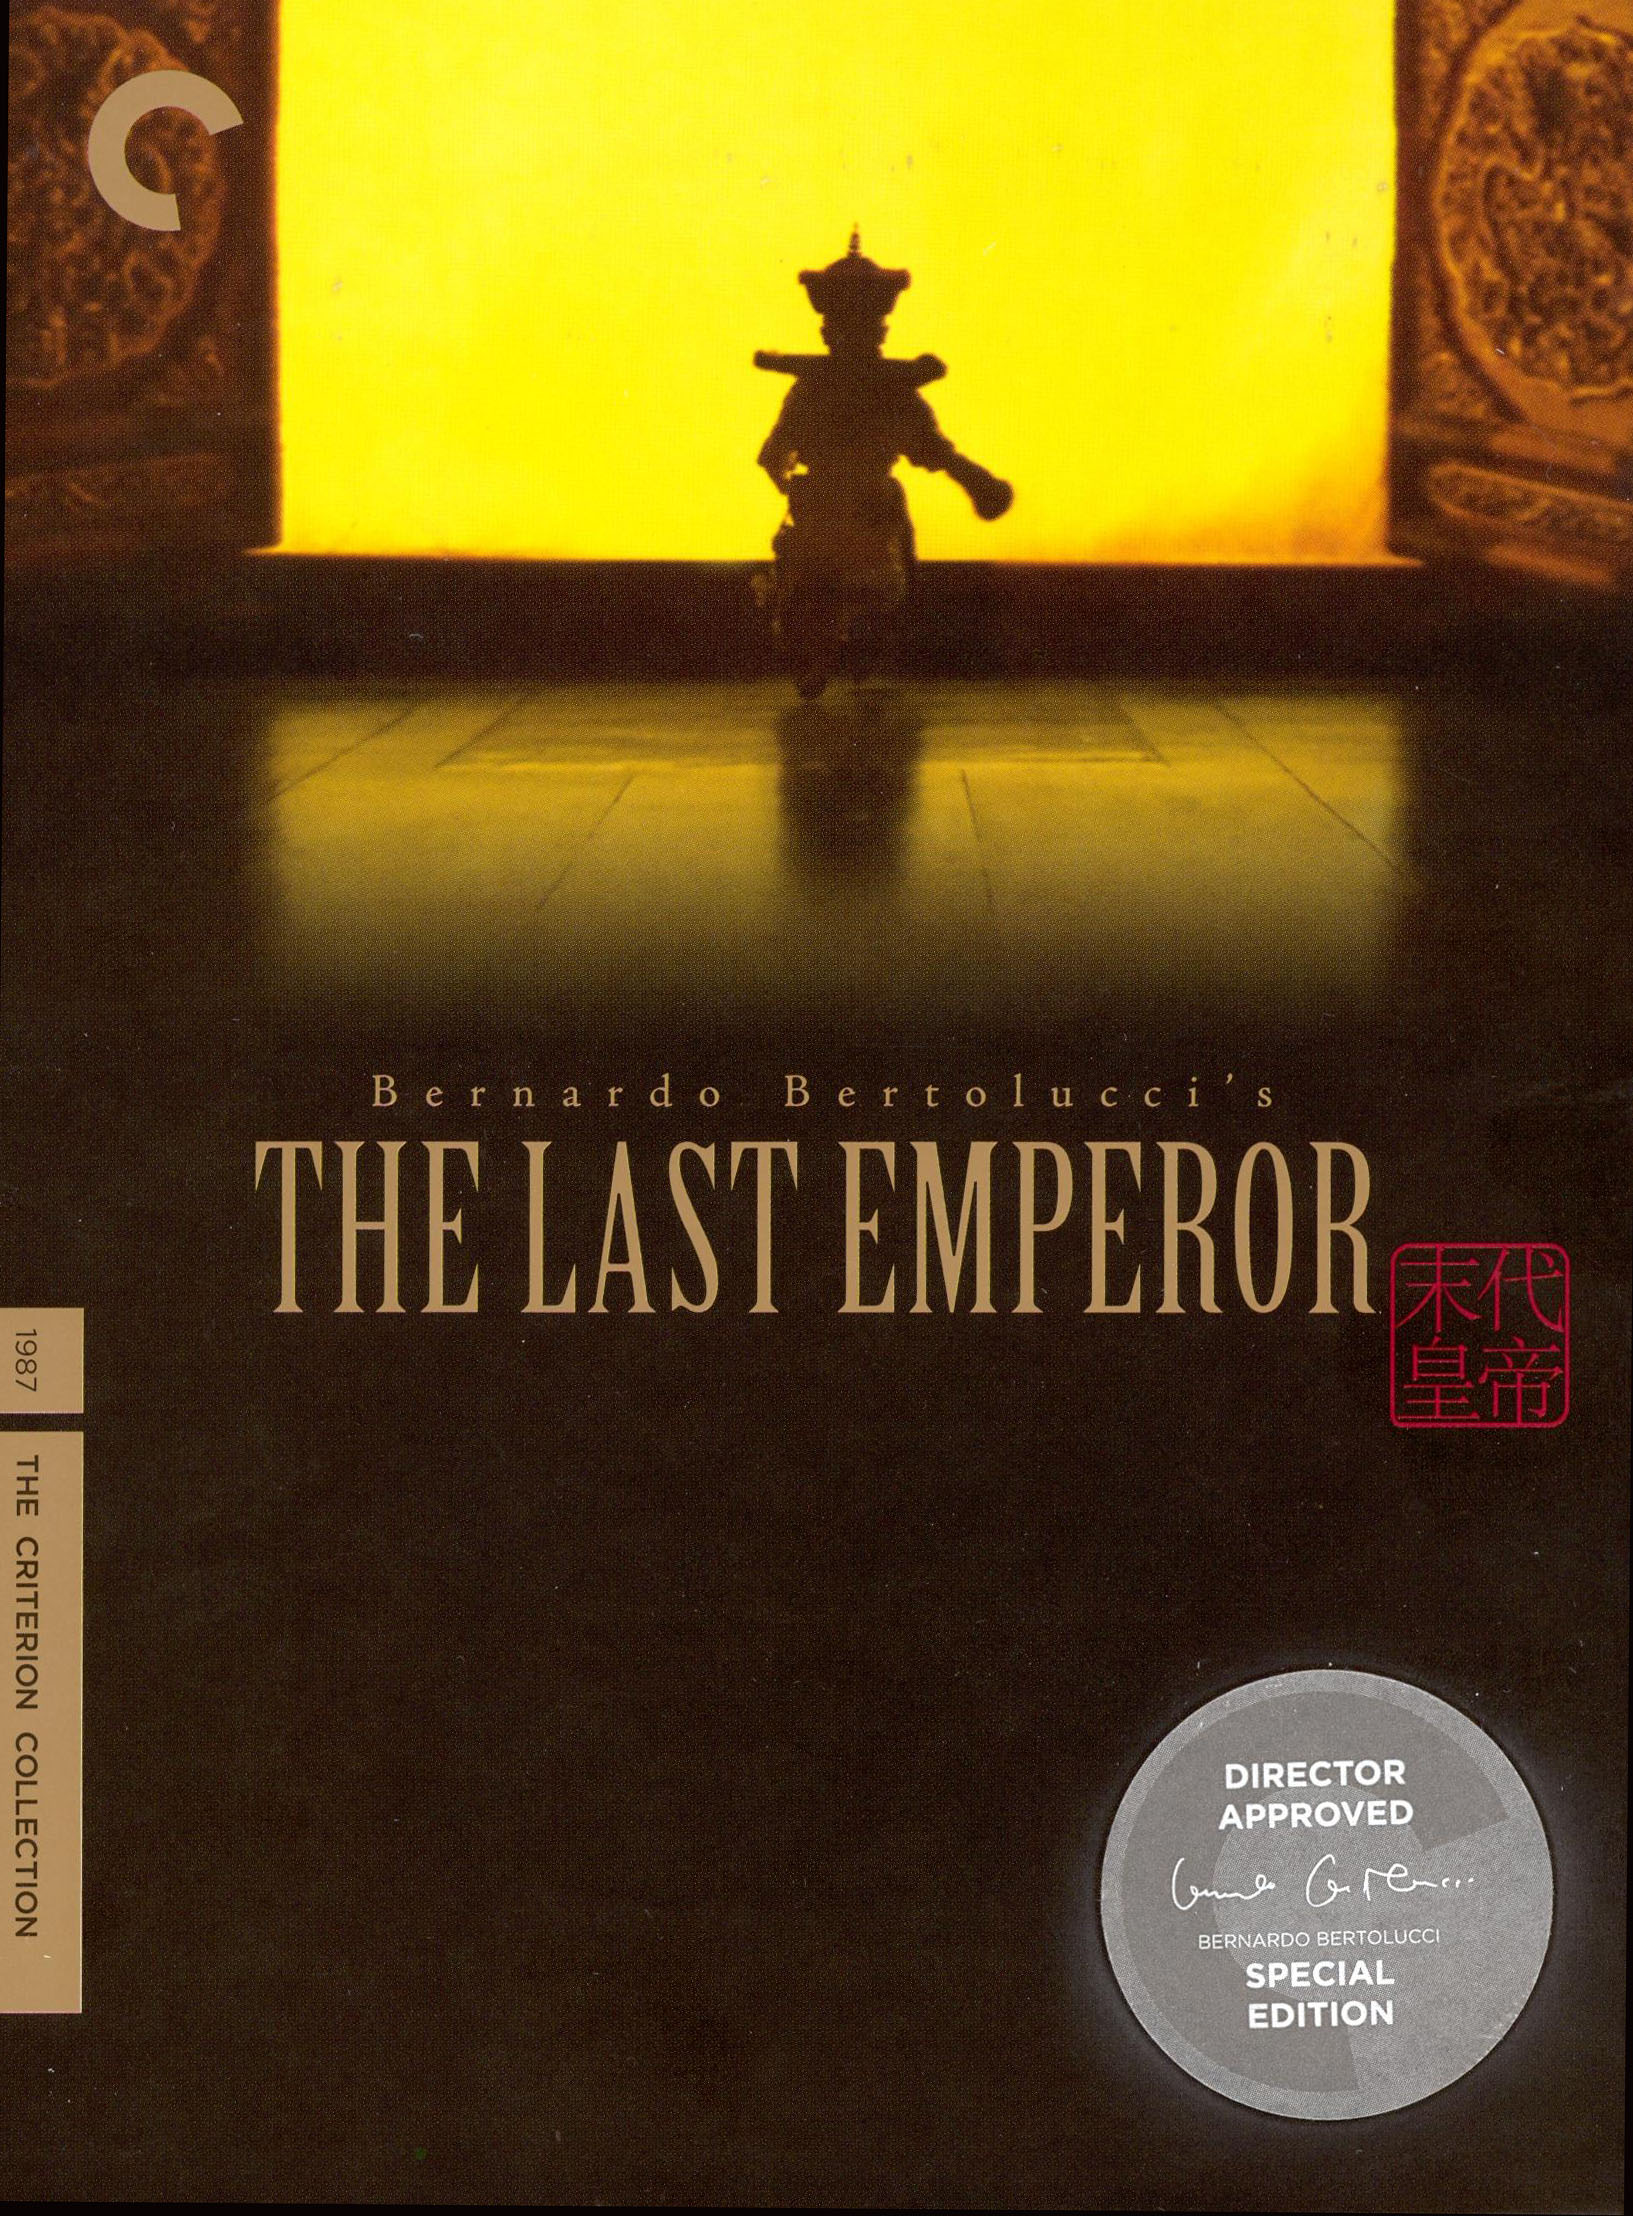 technical staff lip The Last Emperor [4 Discs] [Criterion Collection] [DVD] [1987] - Best Buy